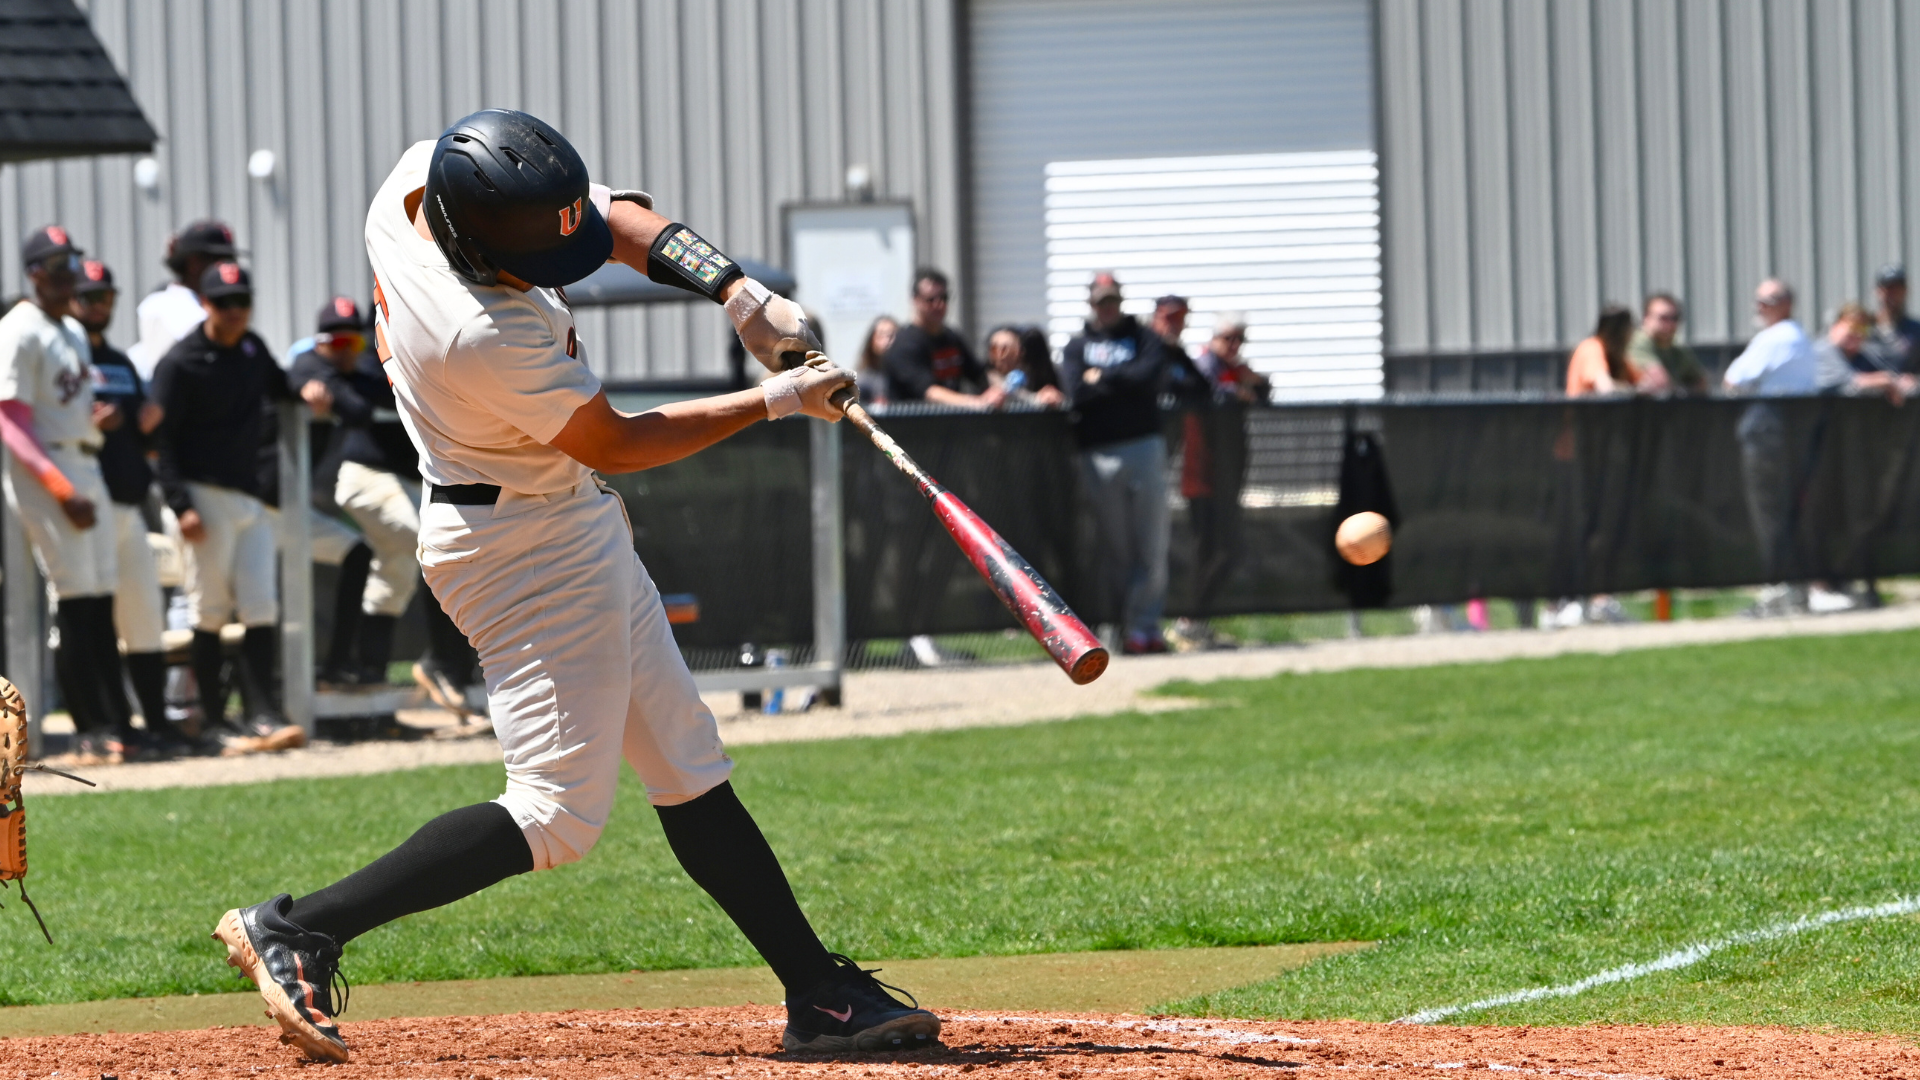 Union collects 13 hits, but drops doubleheader to Pikeville